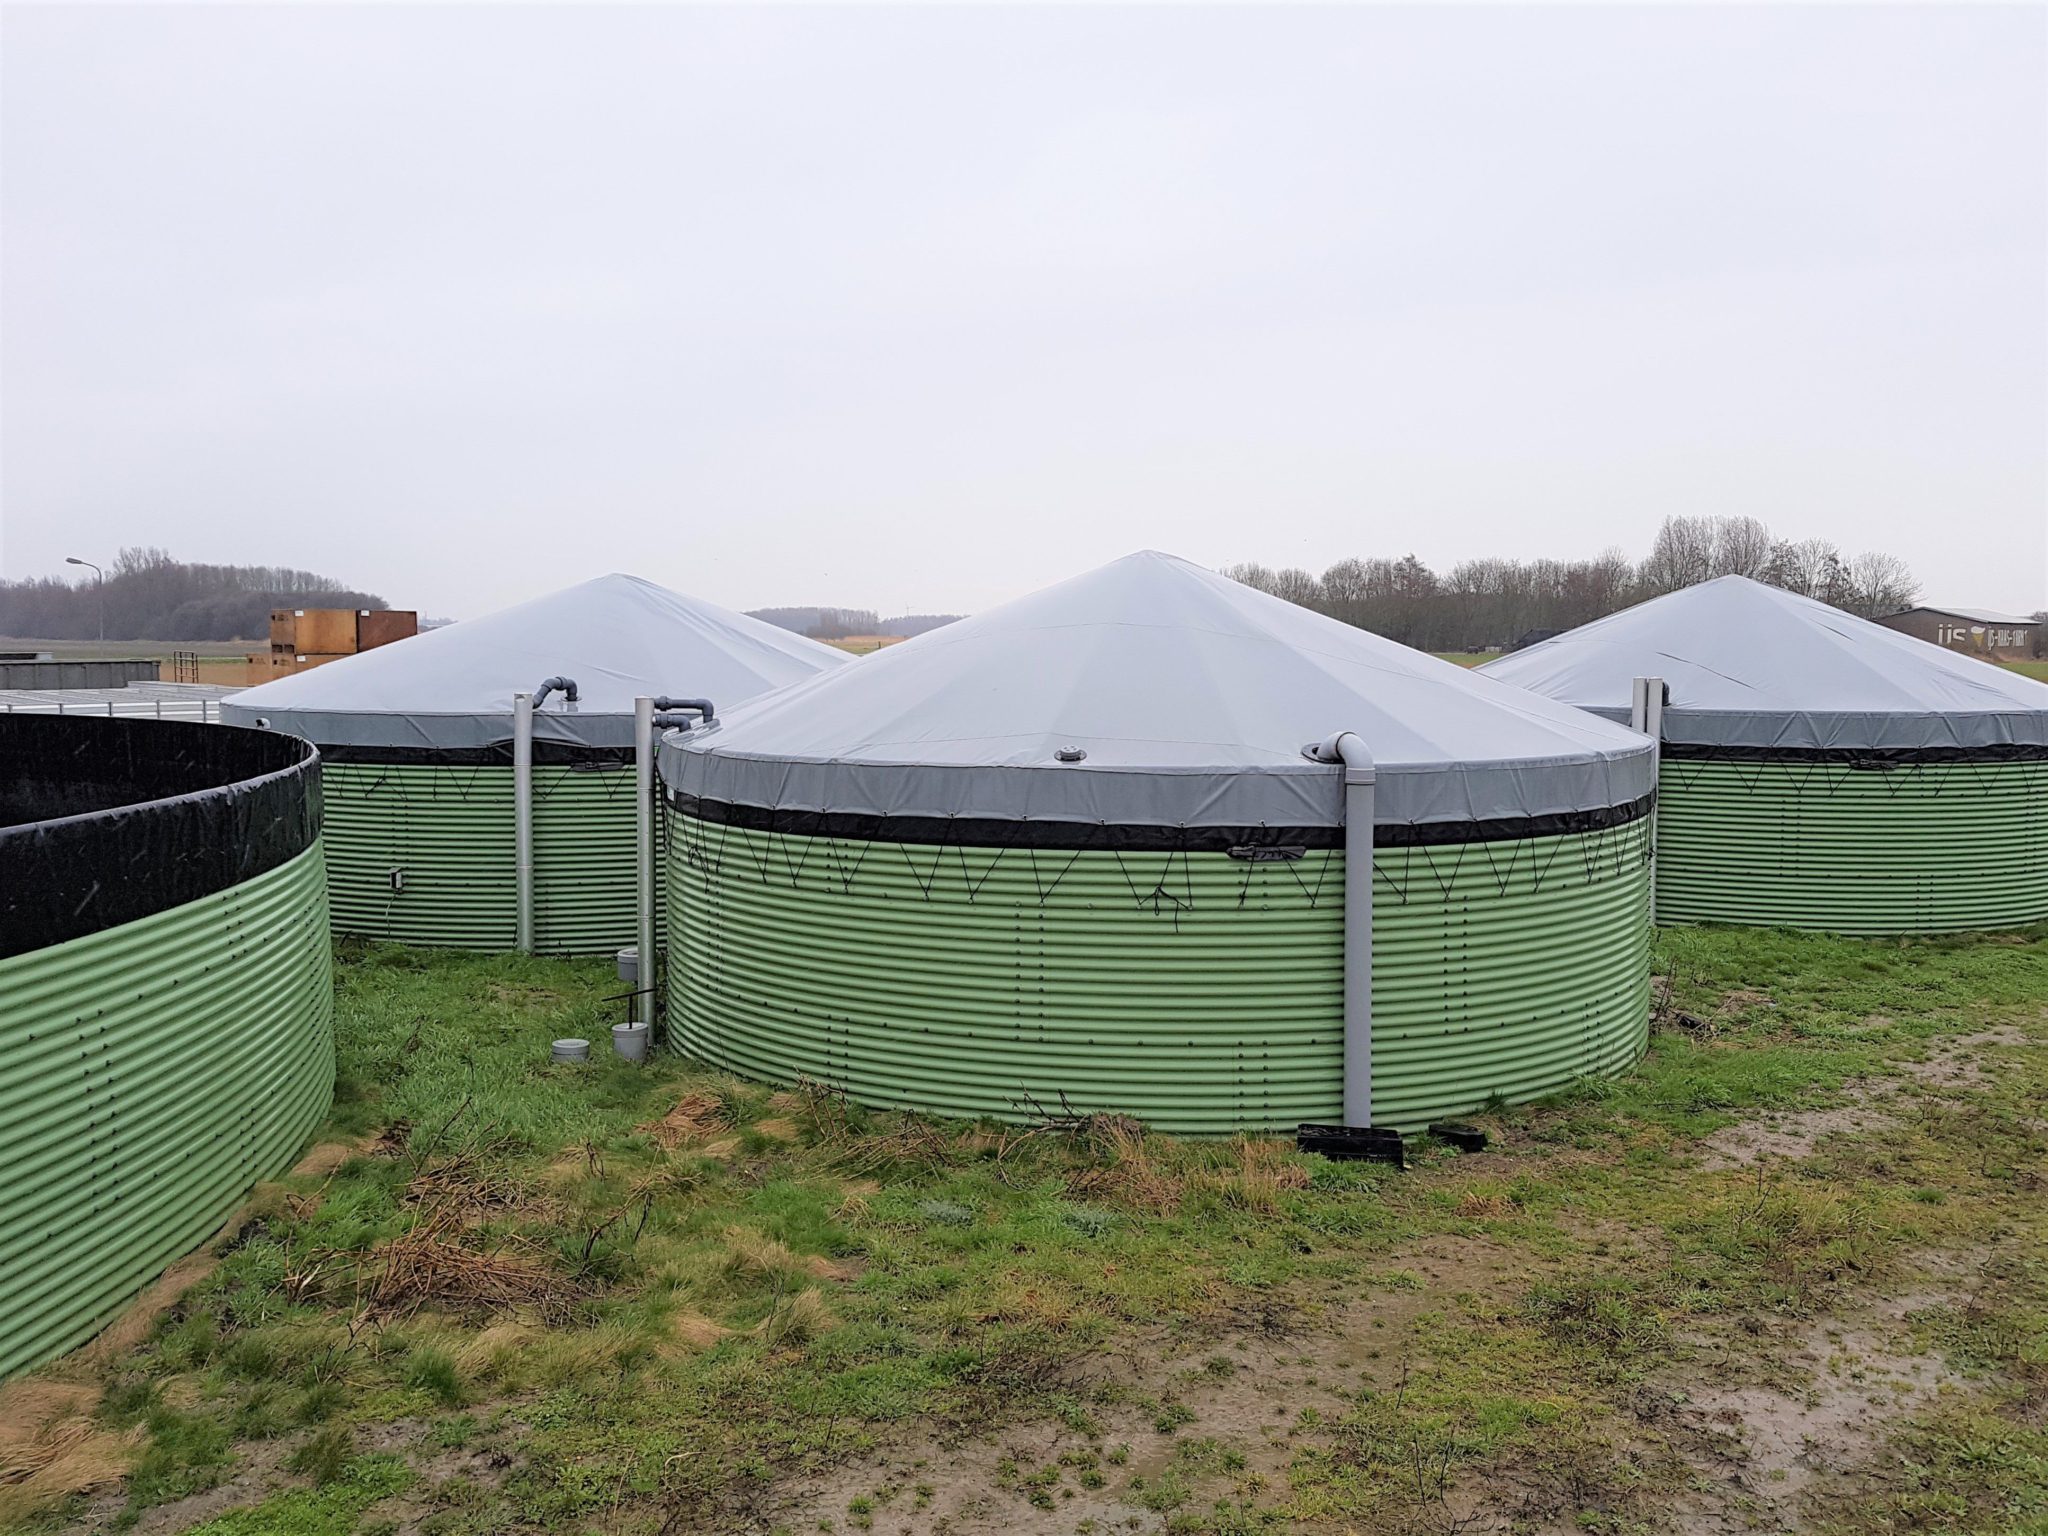 8 facts about the coating of our metal water tanks